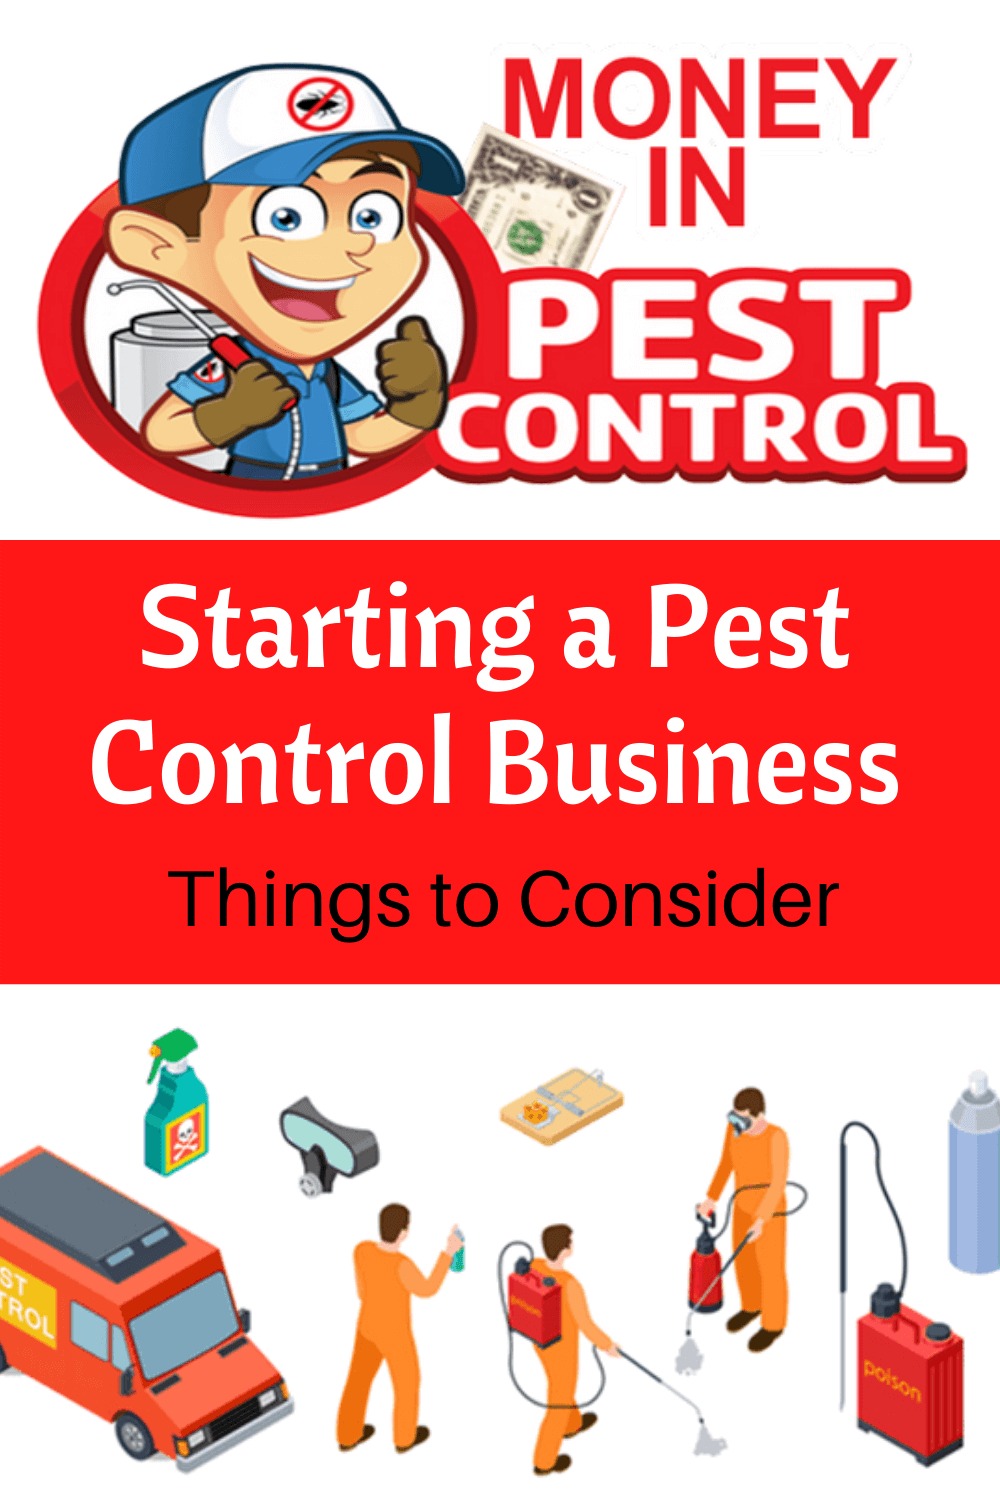 Starting a pest control business - things to consider